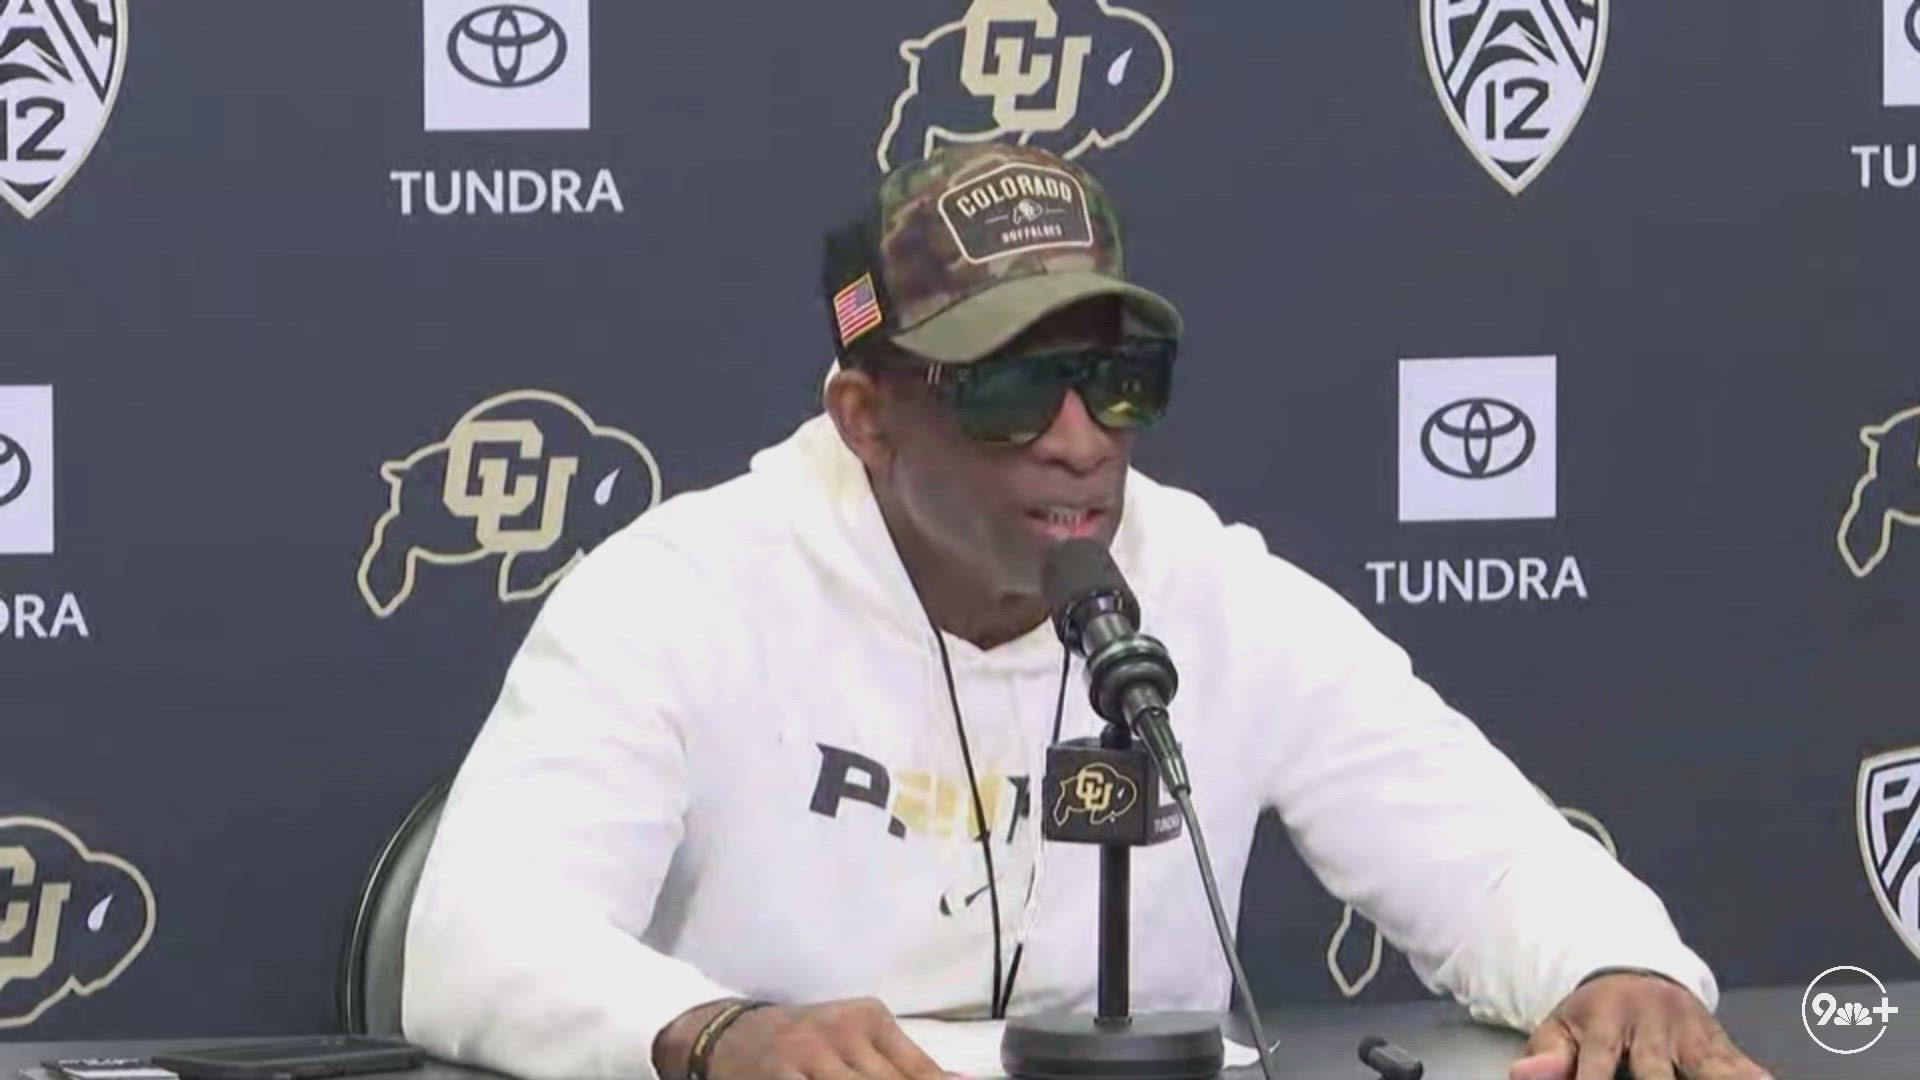 University of Colorado head coach Deion Sanders addressed the arrest of several suspects related to the theft of jewelry from the Colorado Buffaloes' locker room.